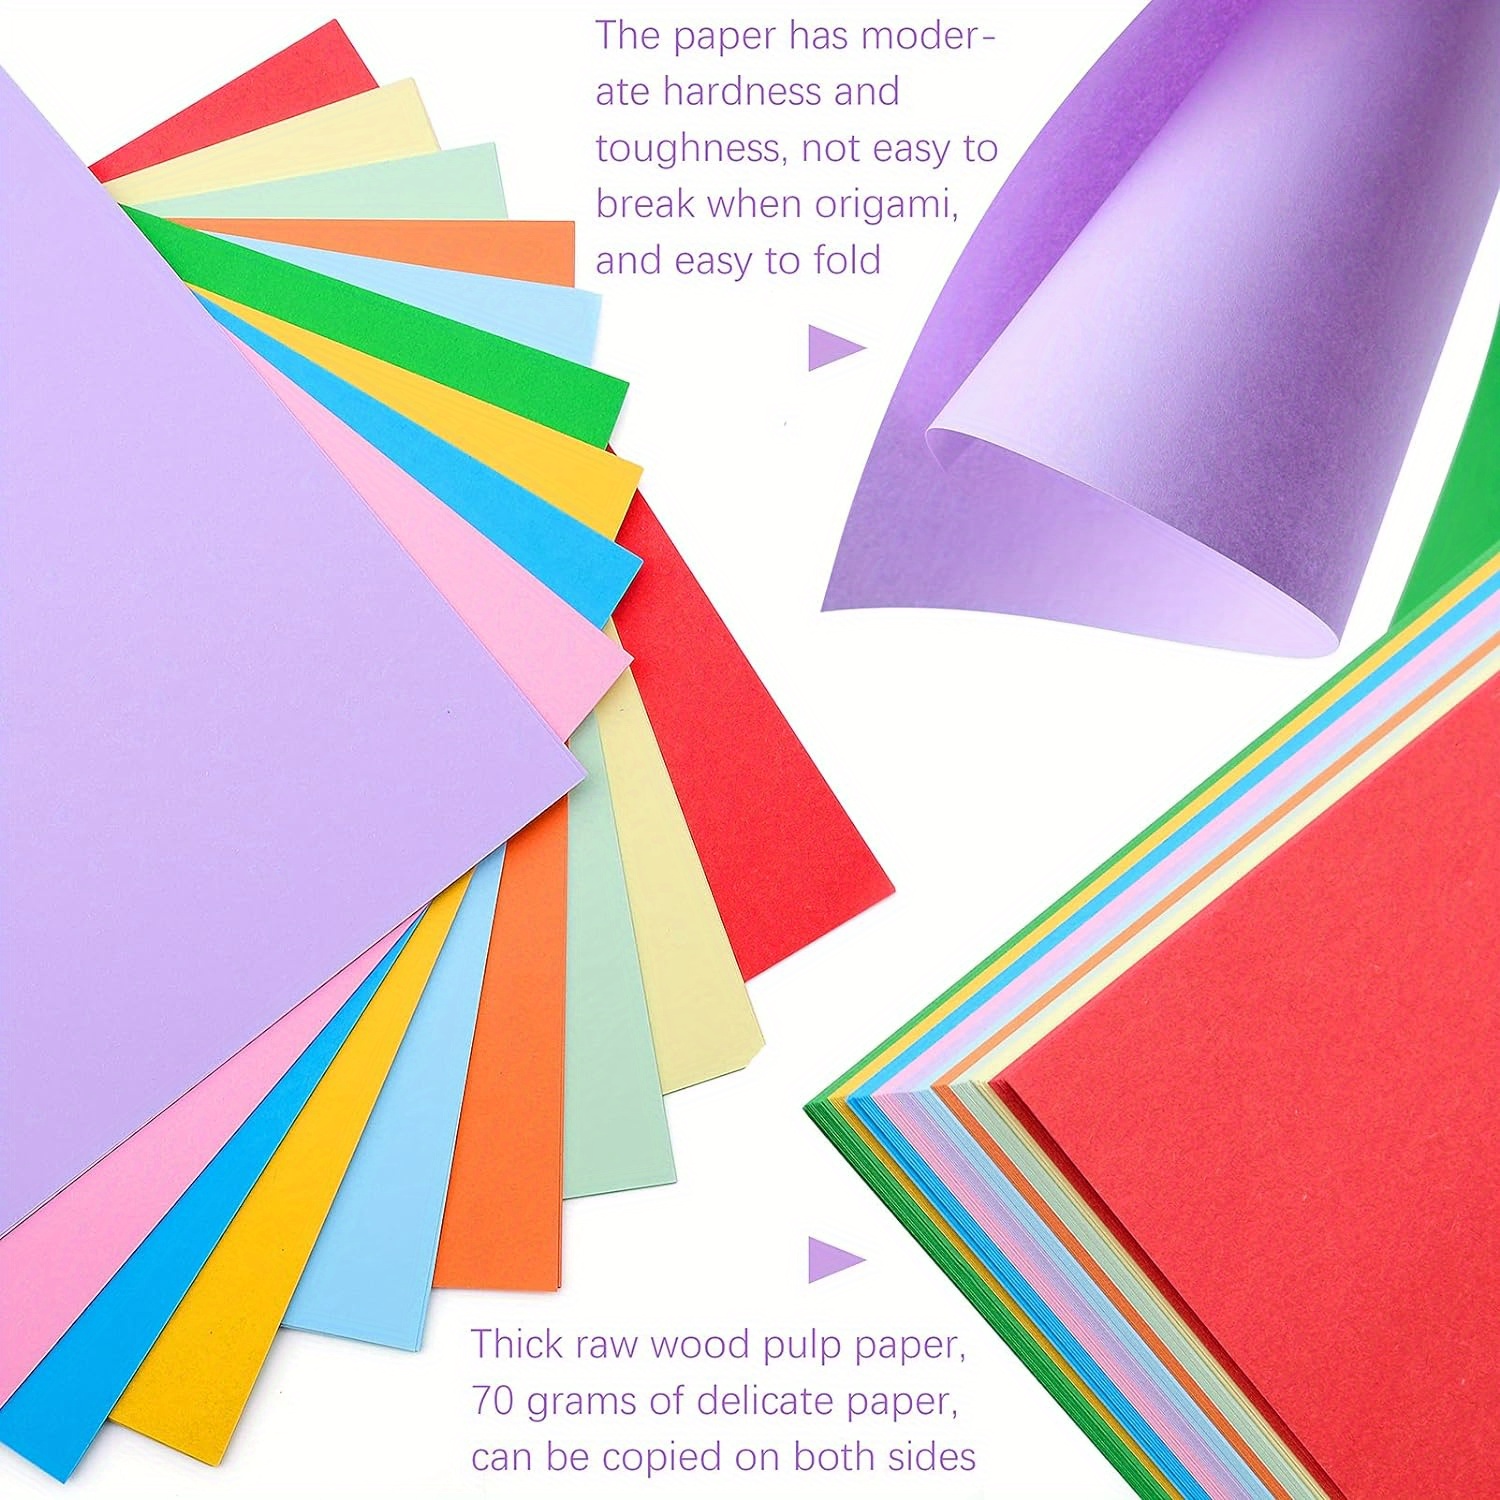 Value Pack 100pcs Color Printing Paper, A4 Color Double-sided Printing  Paper, 10 Color Art And Craft Origami Paper, A4 Printing Paper, Handmade  Color Paper Origami Paper, Shop The Latest Trends